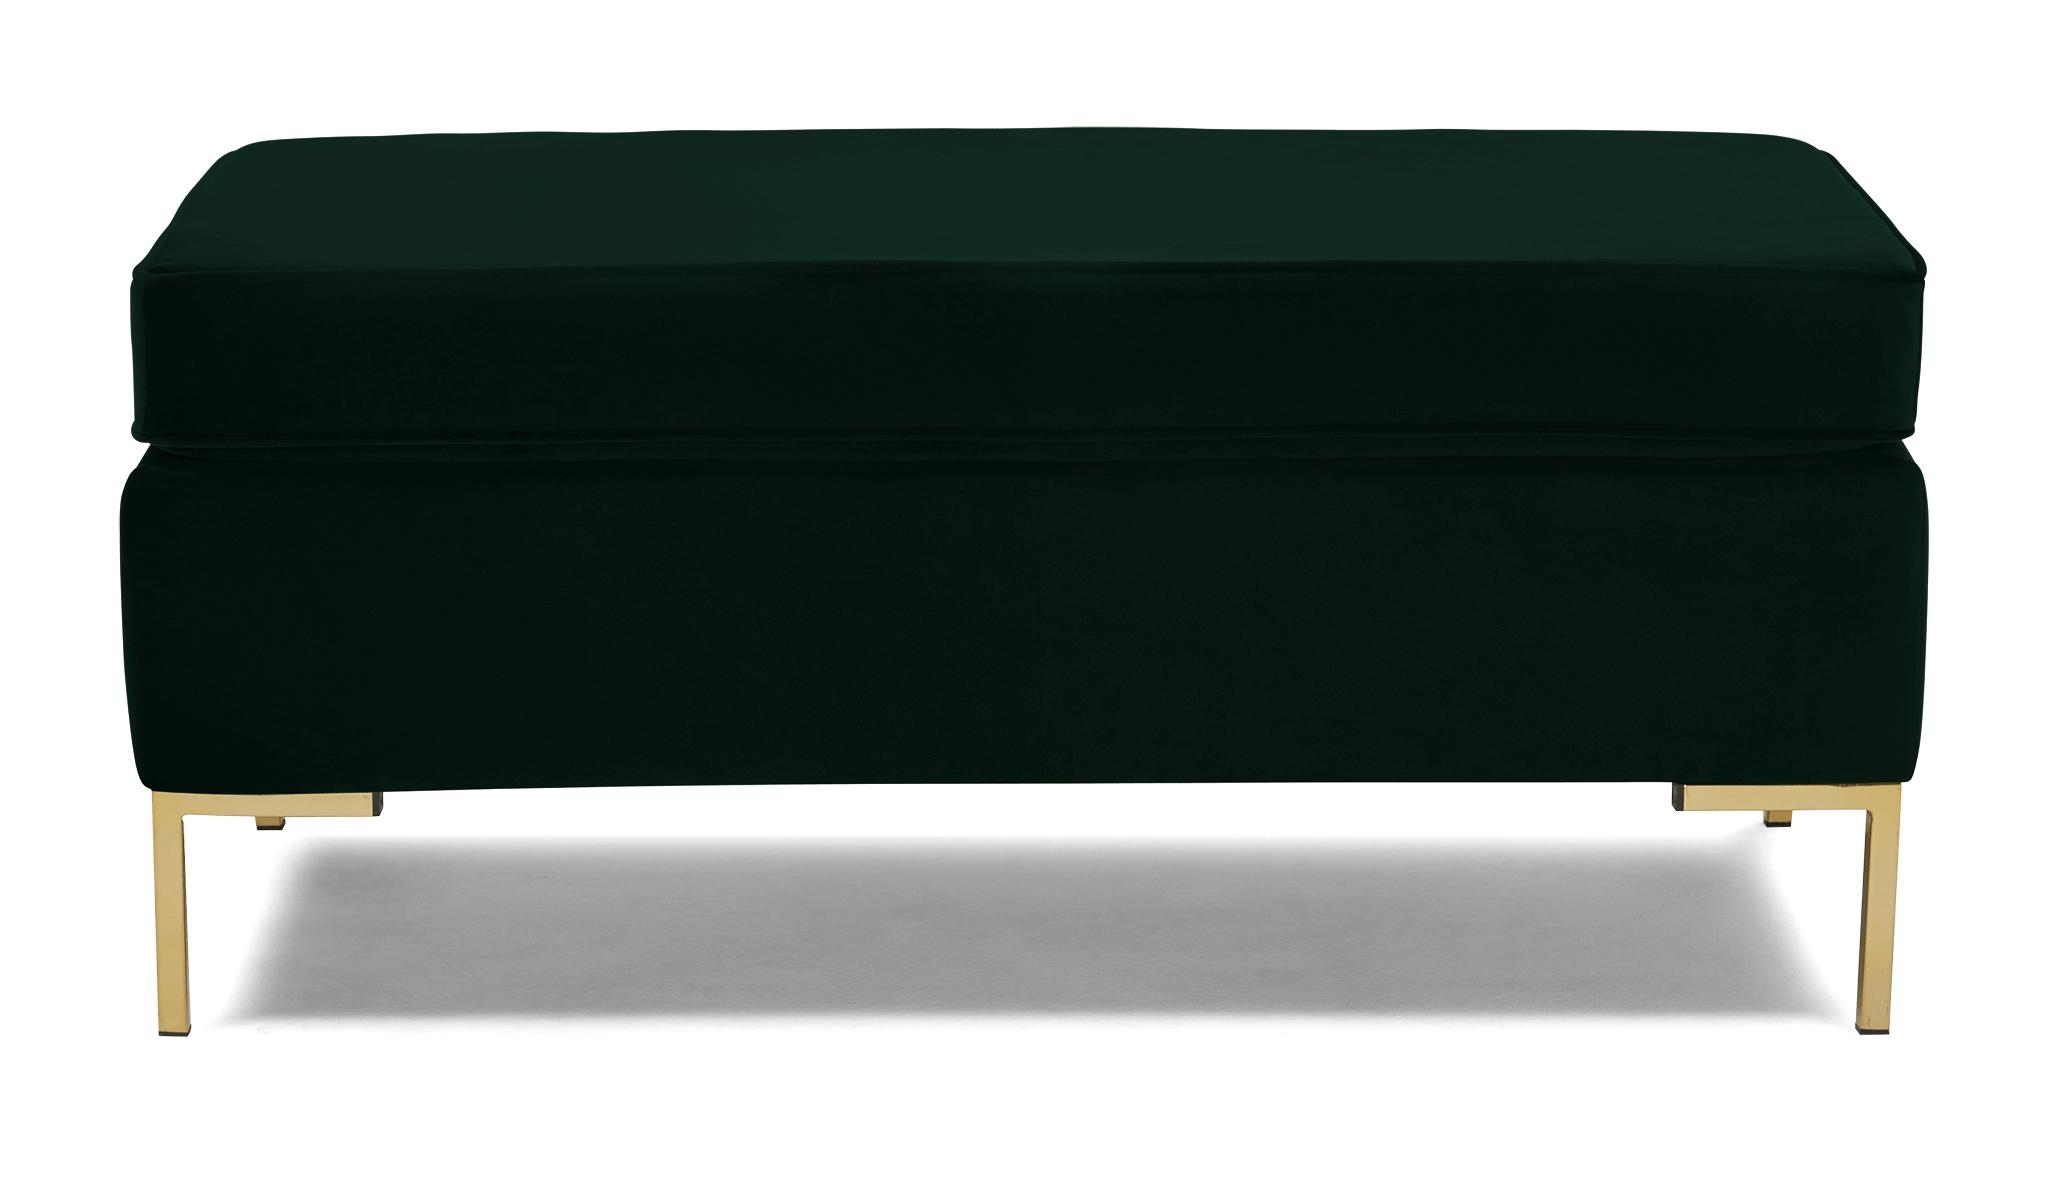 Green Dee Mid Century Modern Bench with Storage - Royale Evergreen - Image 0